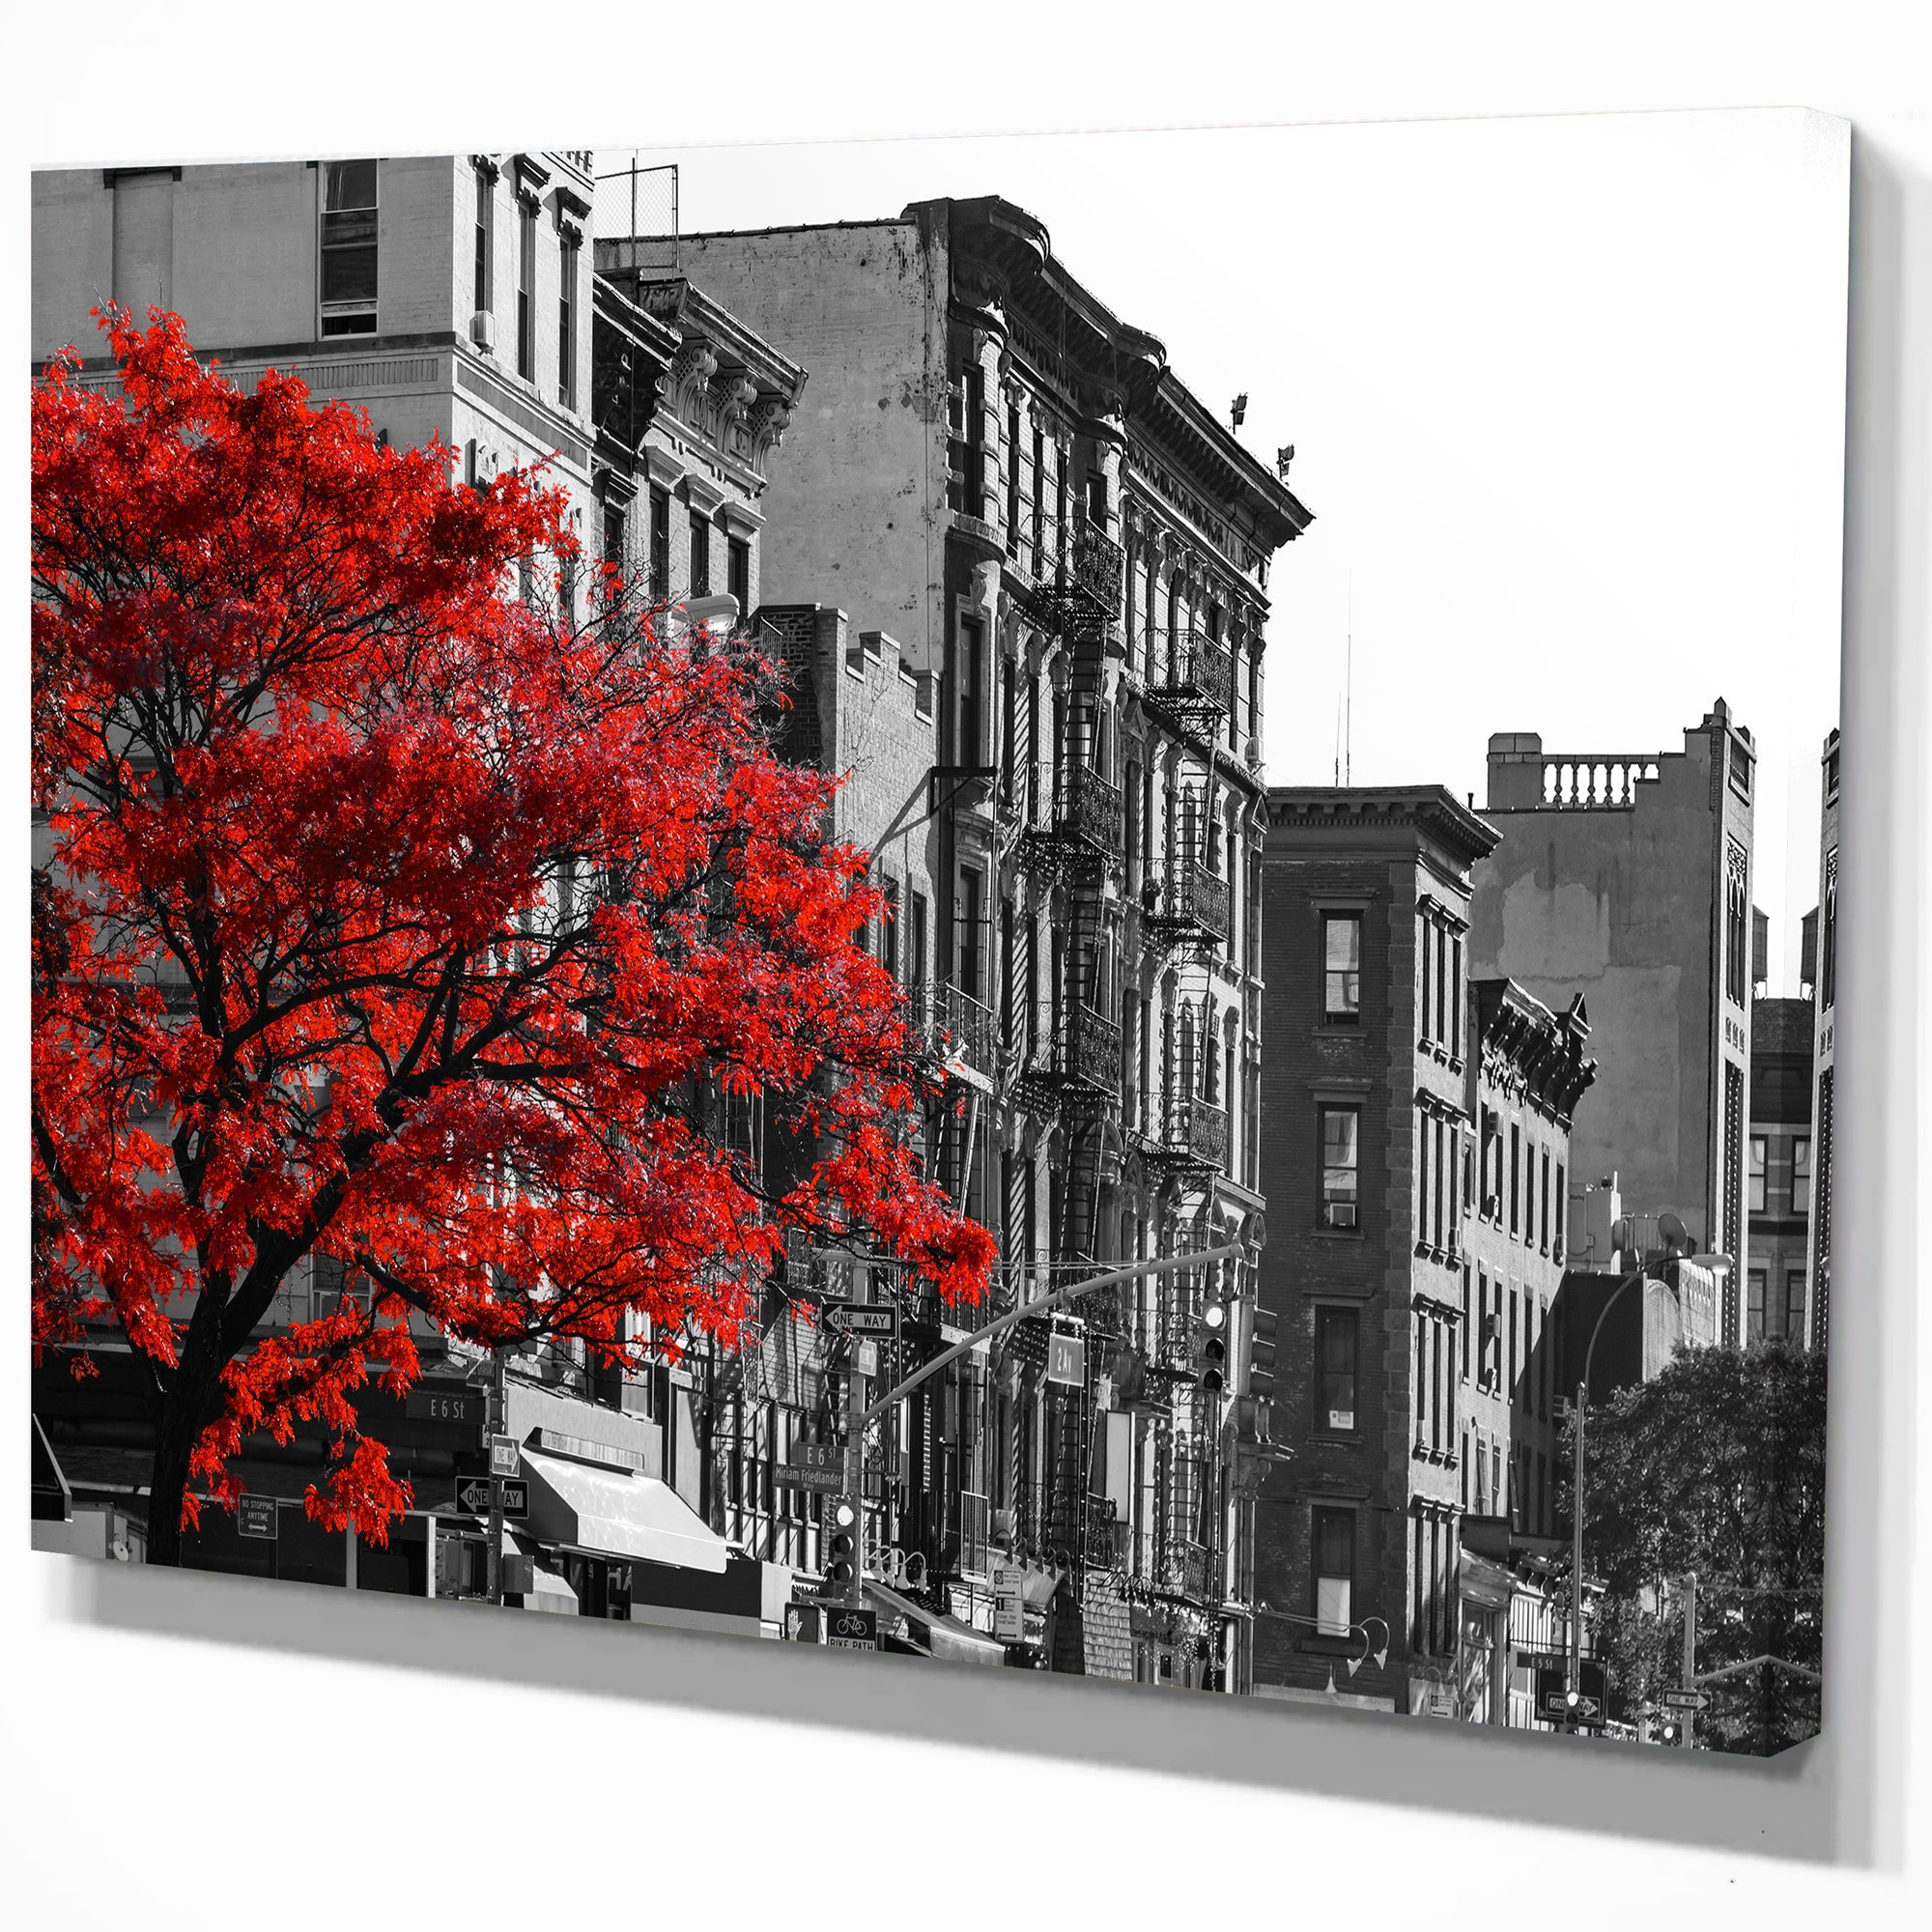 Home Decor City Art Country Painting Red Boots Art City Street Road Housewarming Gift Red Dress Woman in Red Boots Art Print